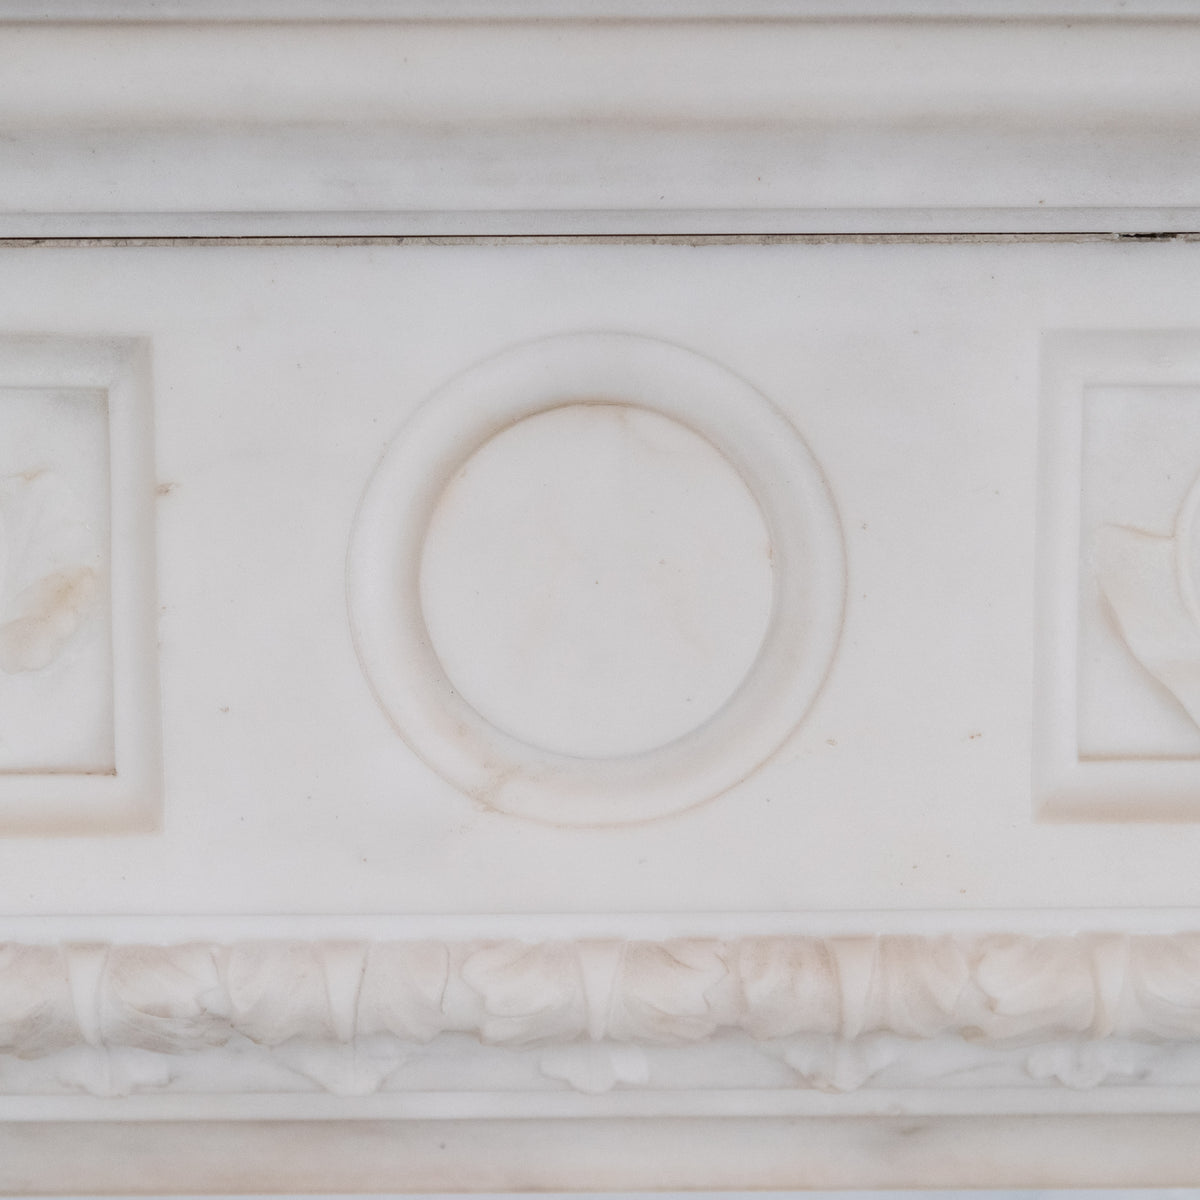 Monumental Antique Statuary Marble Carved Chimneypiece | The Architectural Forum